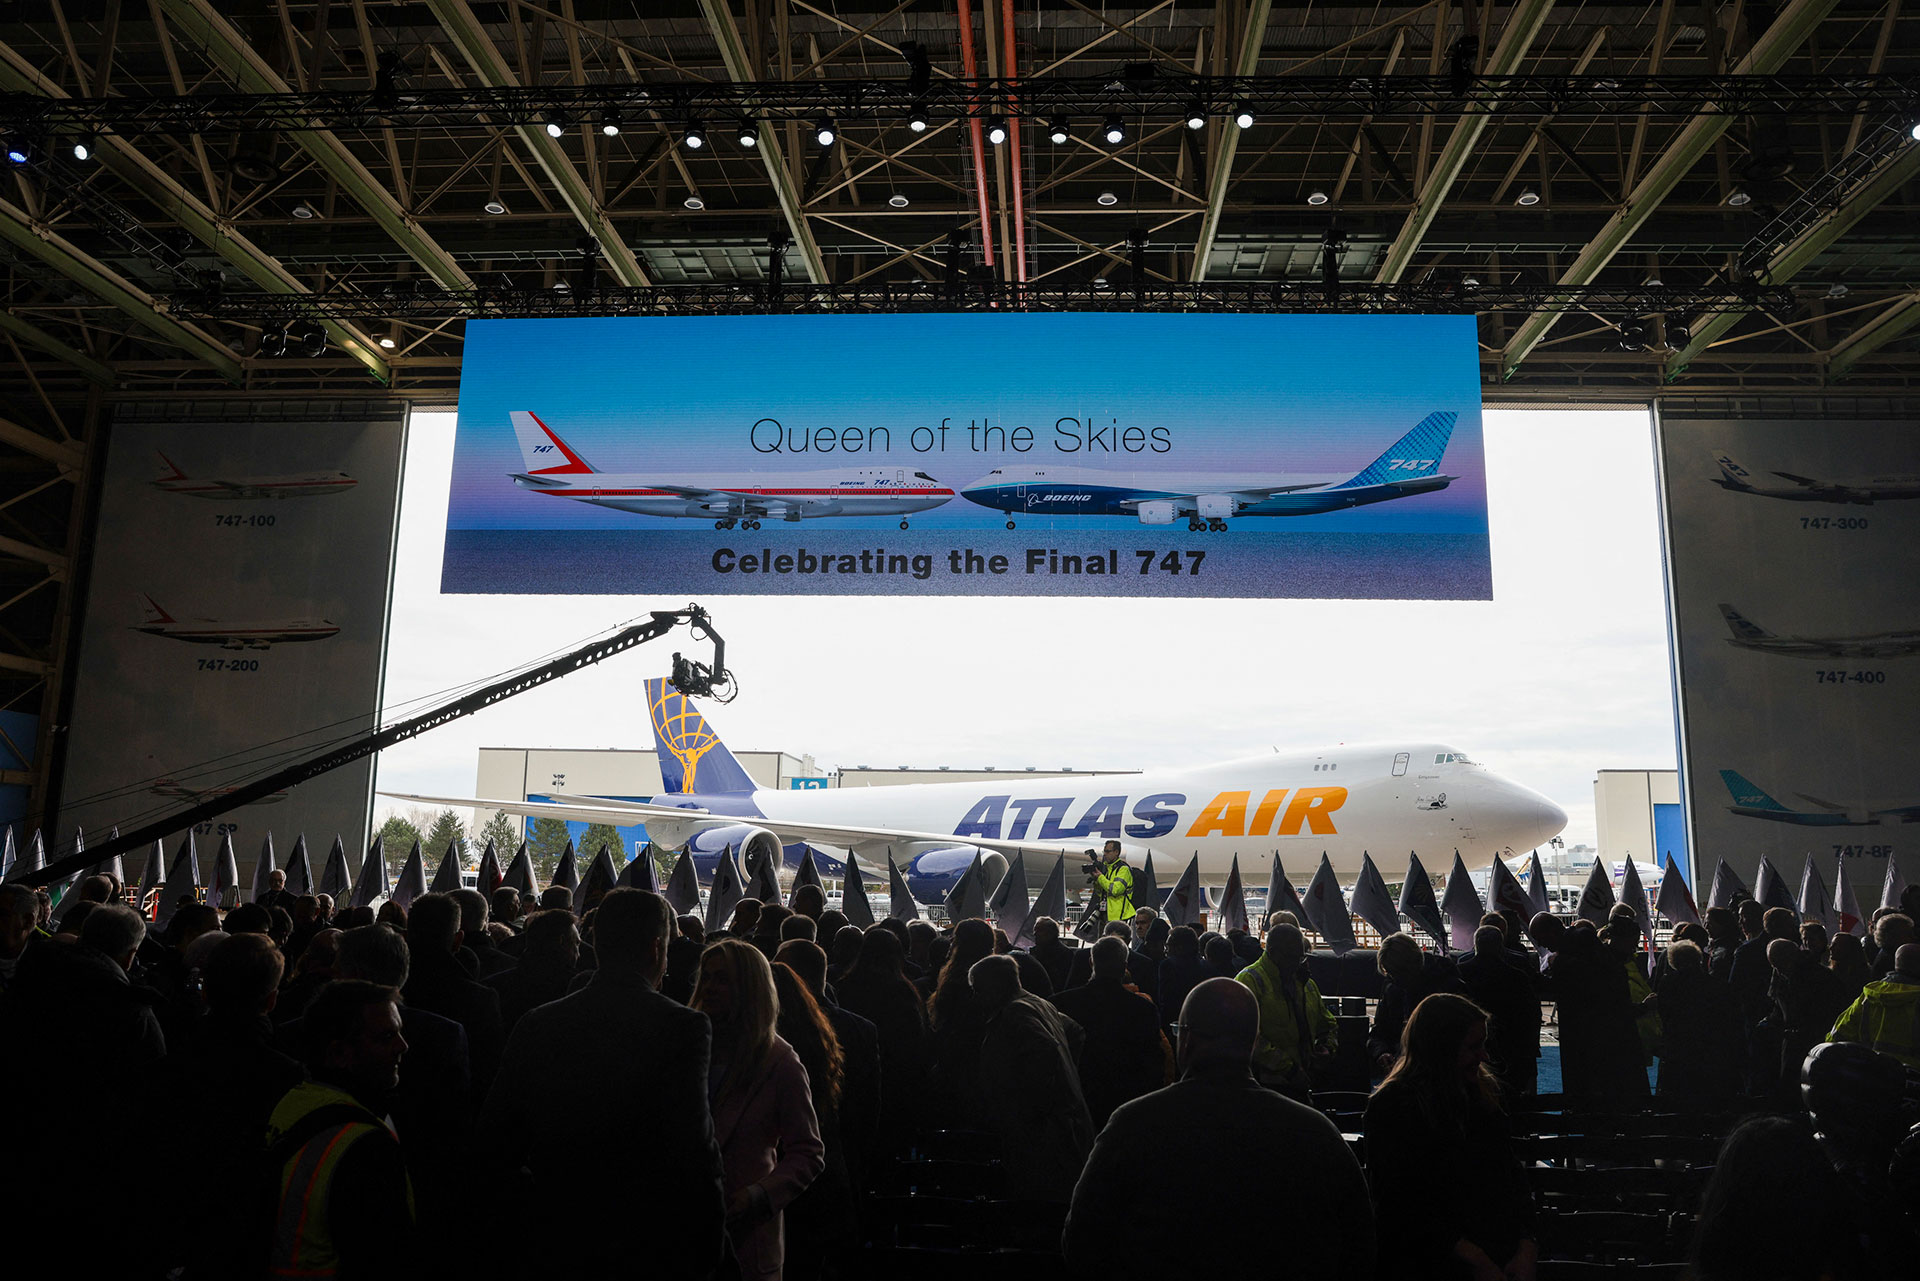 Current and former employees, customers and guests participate in a ceremony to mark the delivery of the last Boeing 747 aircraft, at the Boeing Future of Flight Museum in Everett, Washington, on January 31, 2023. Jason Redmond / AFP